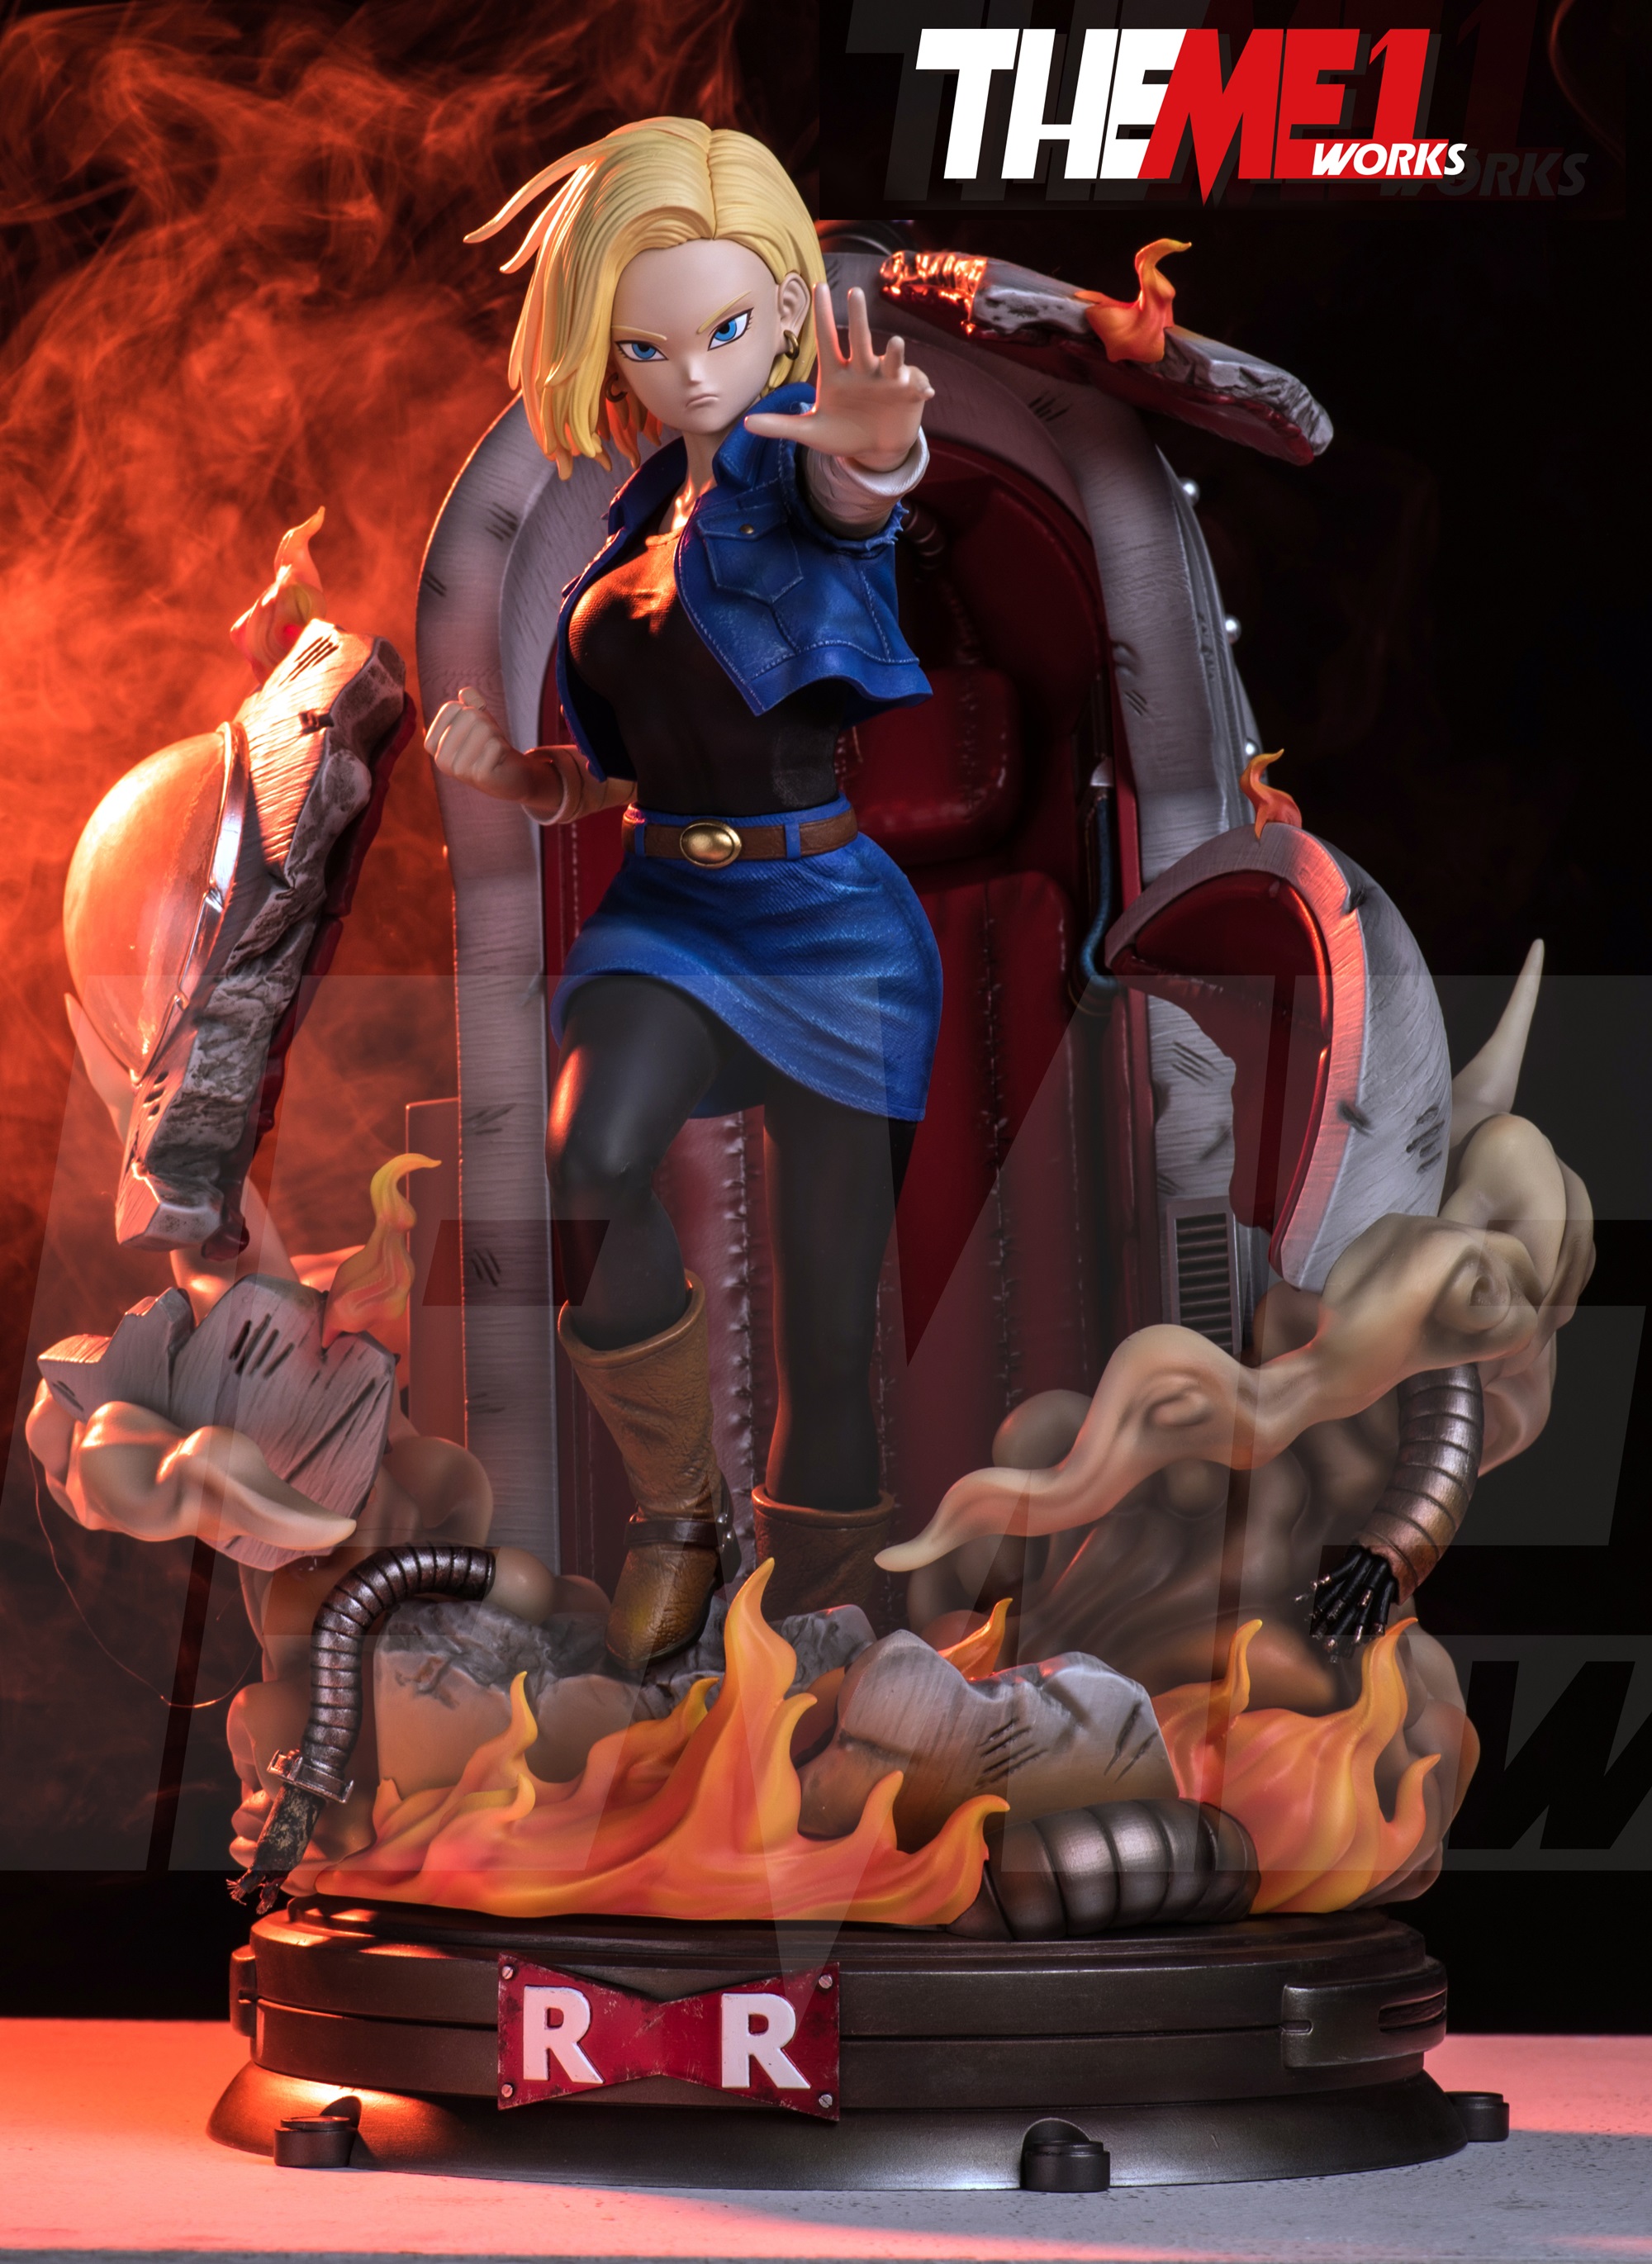 Android 18 By Theme Works 1